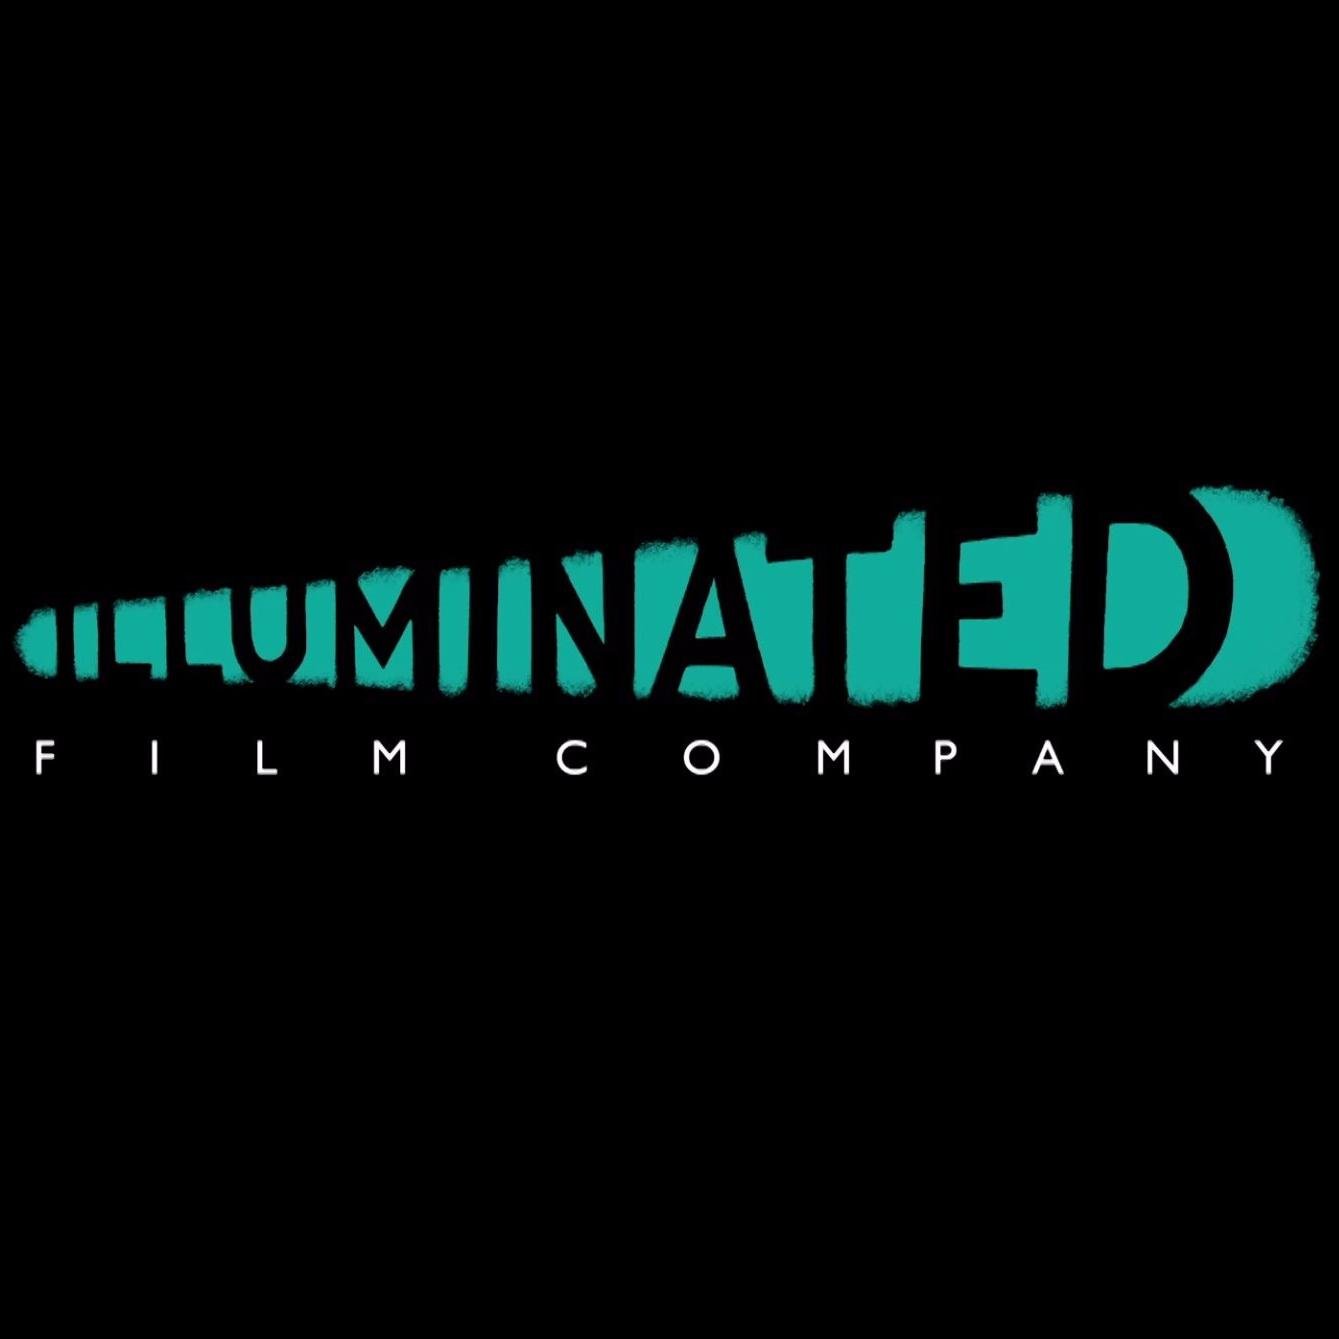 The Illuminated Film Company Appoints New Production Manager